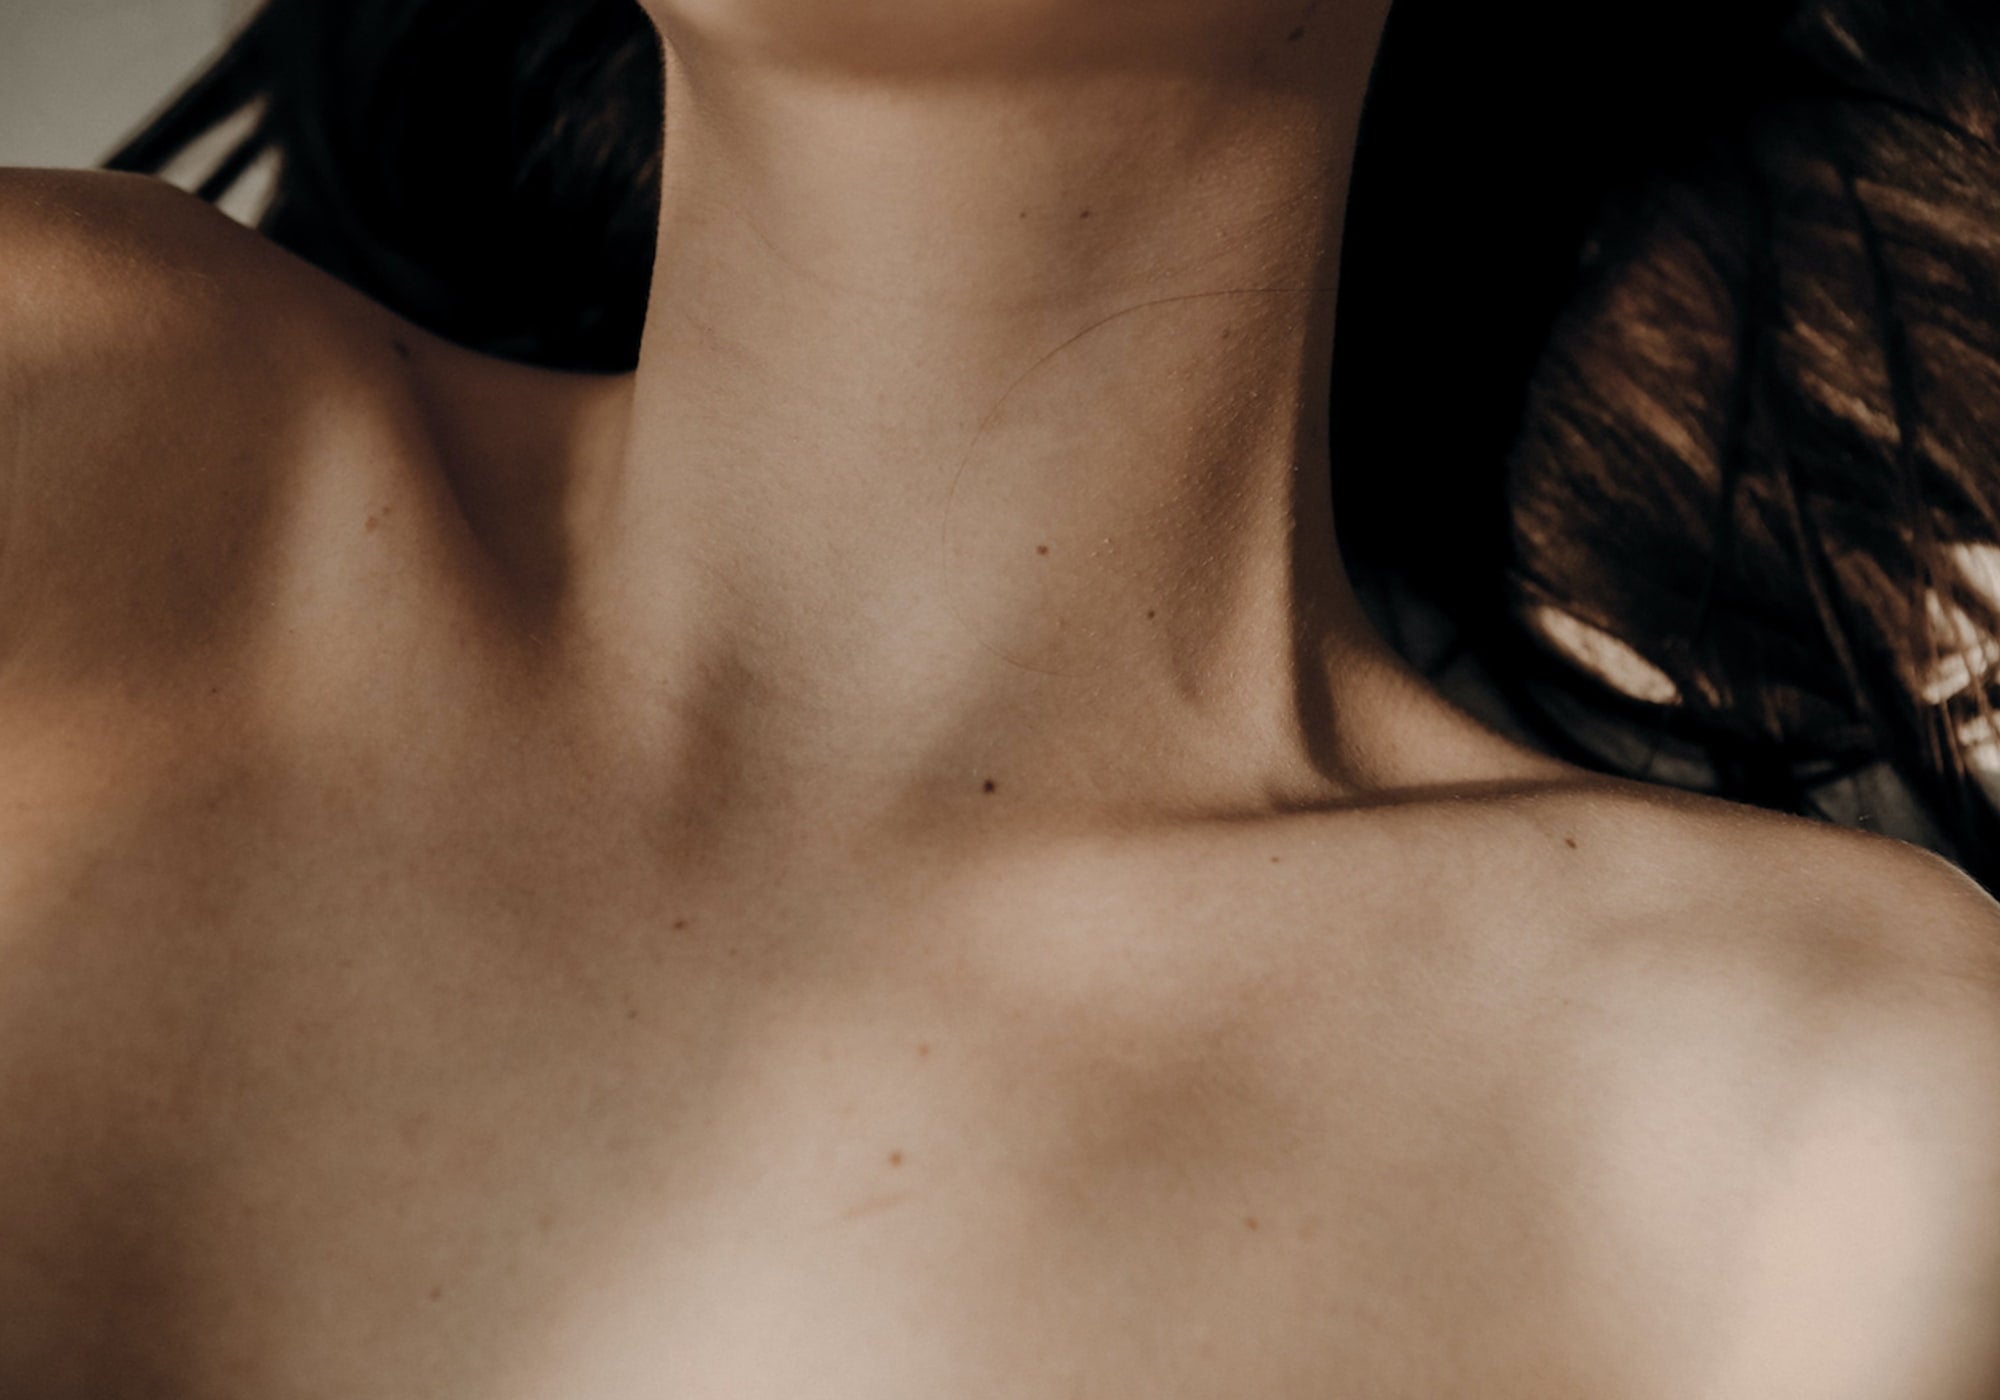 How To Look After The Neck And Décolletage